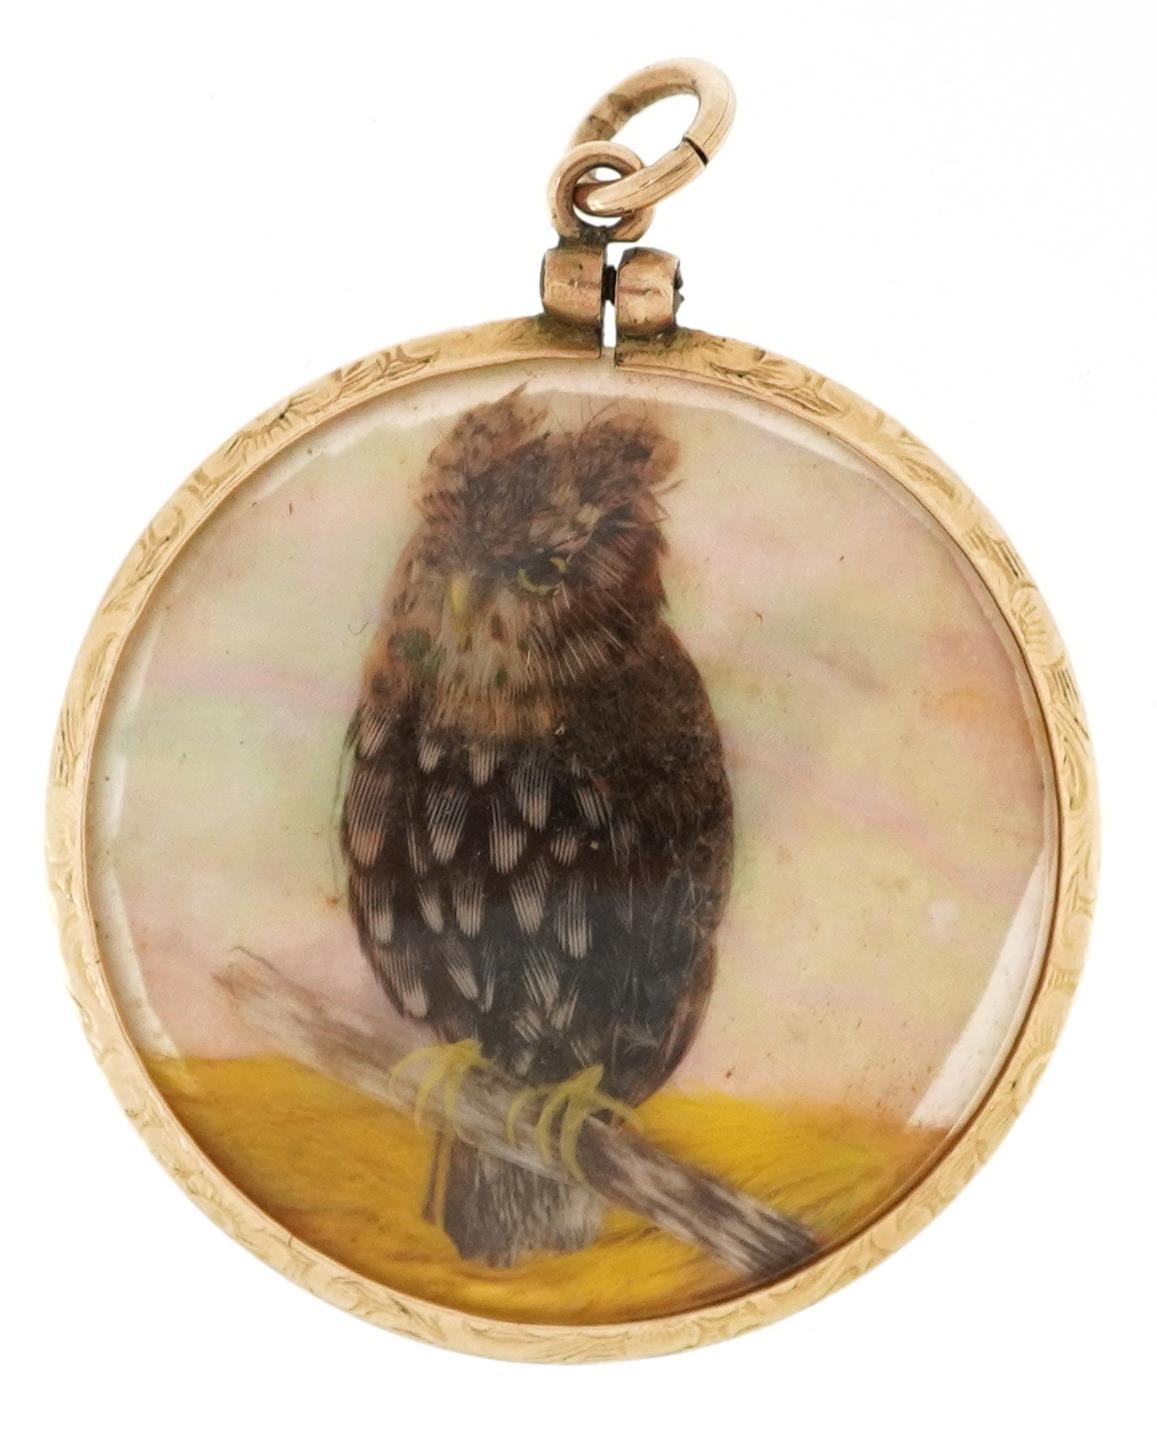 Unmarked gold mother of pearl collage locket decorated in feathers with two birds, 3.2cm in - Image 2 of 2